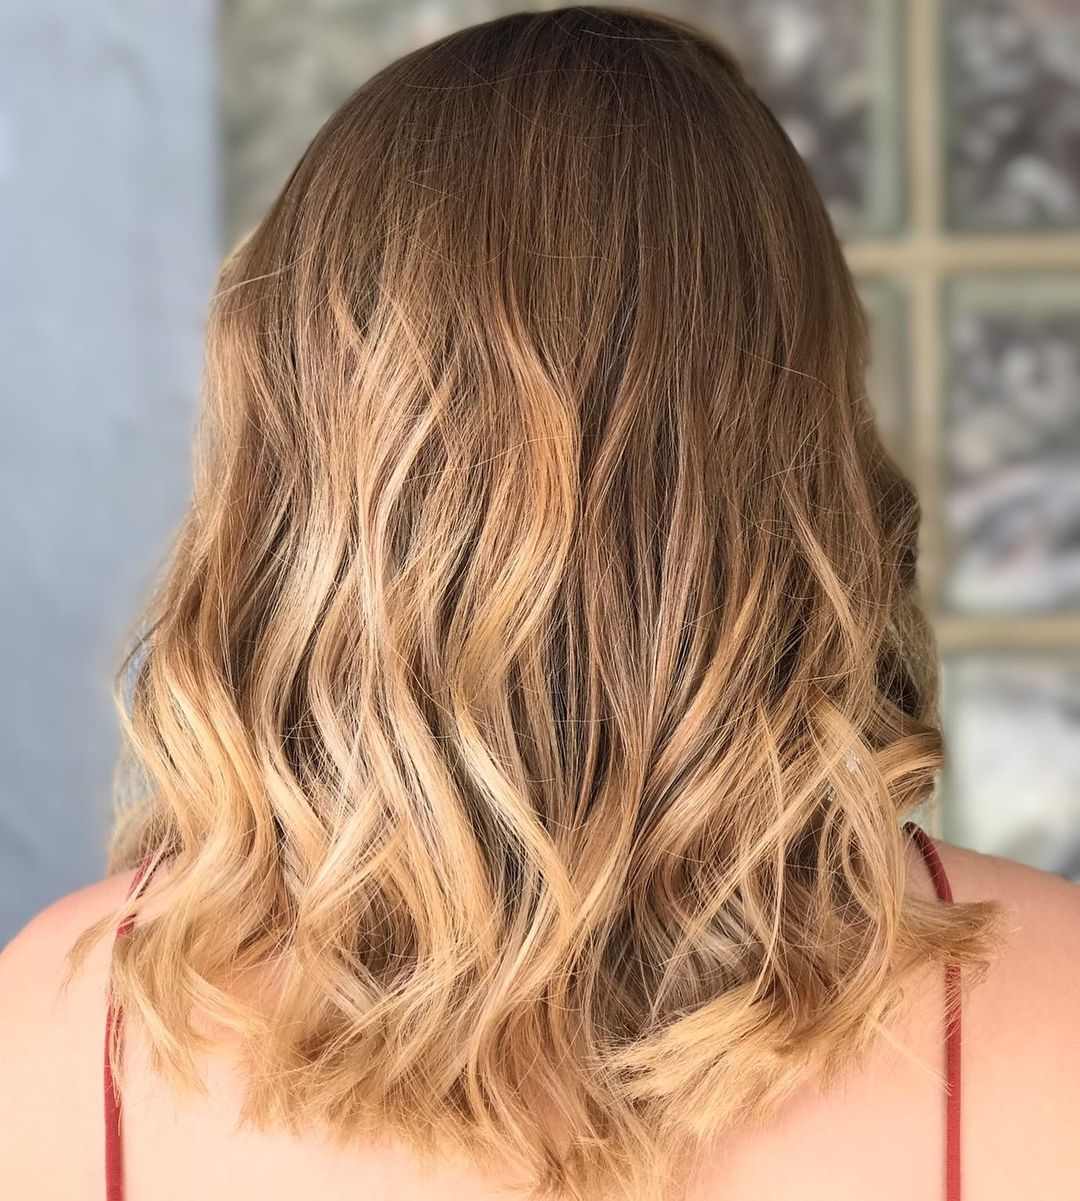 curly hair made with hot air brush